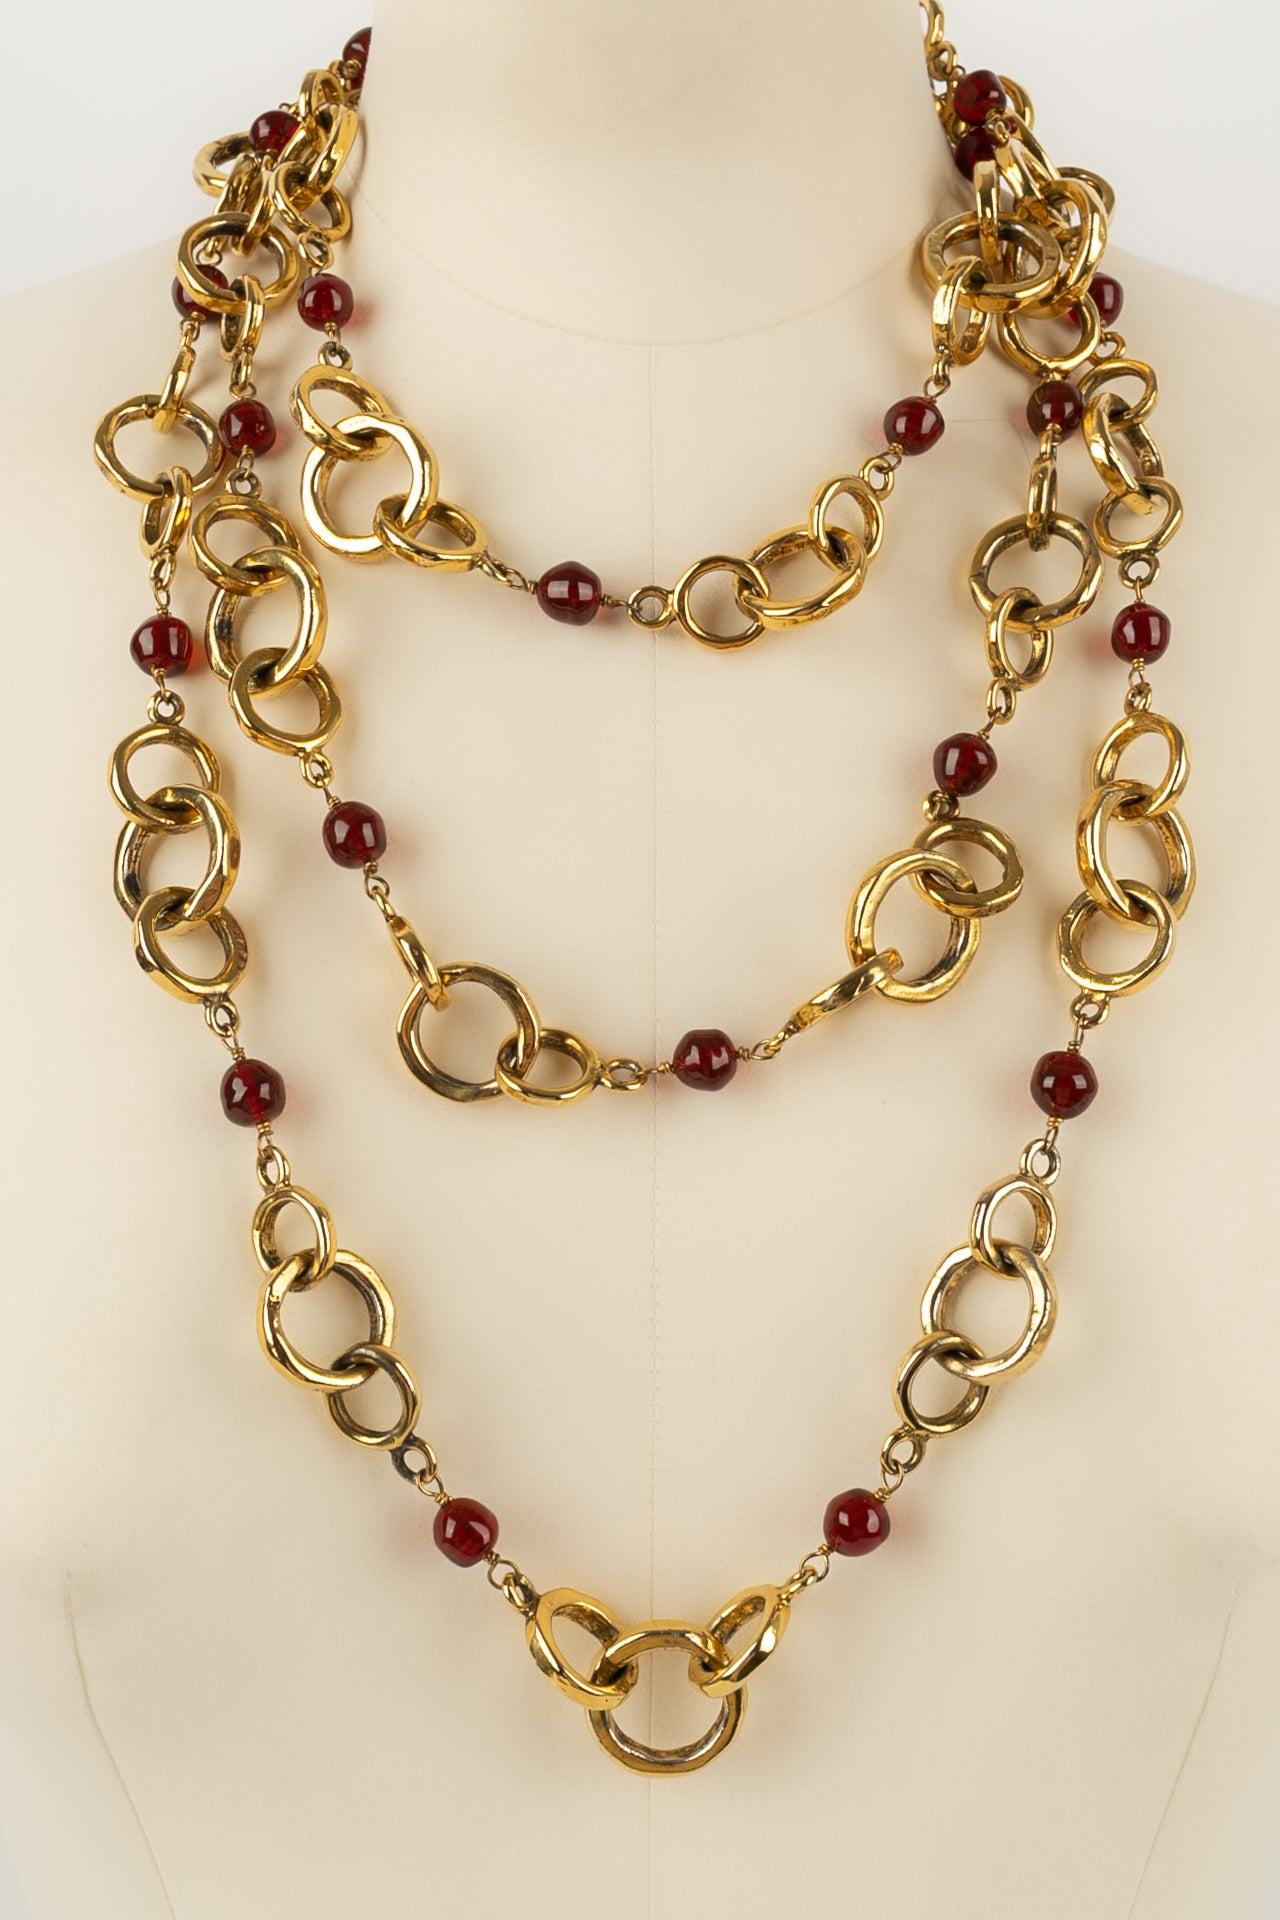 Women's Chanel Long Necklace in Gold Metal and Red Glass Beads, 1984 For Sale